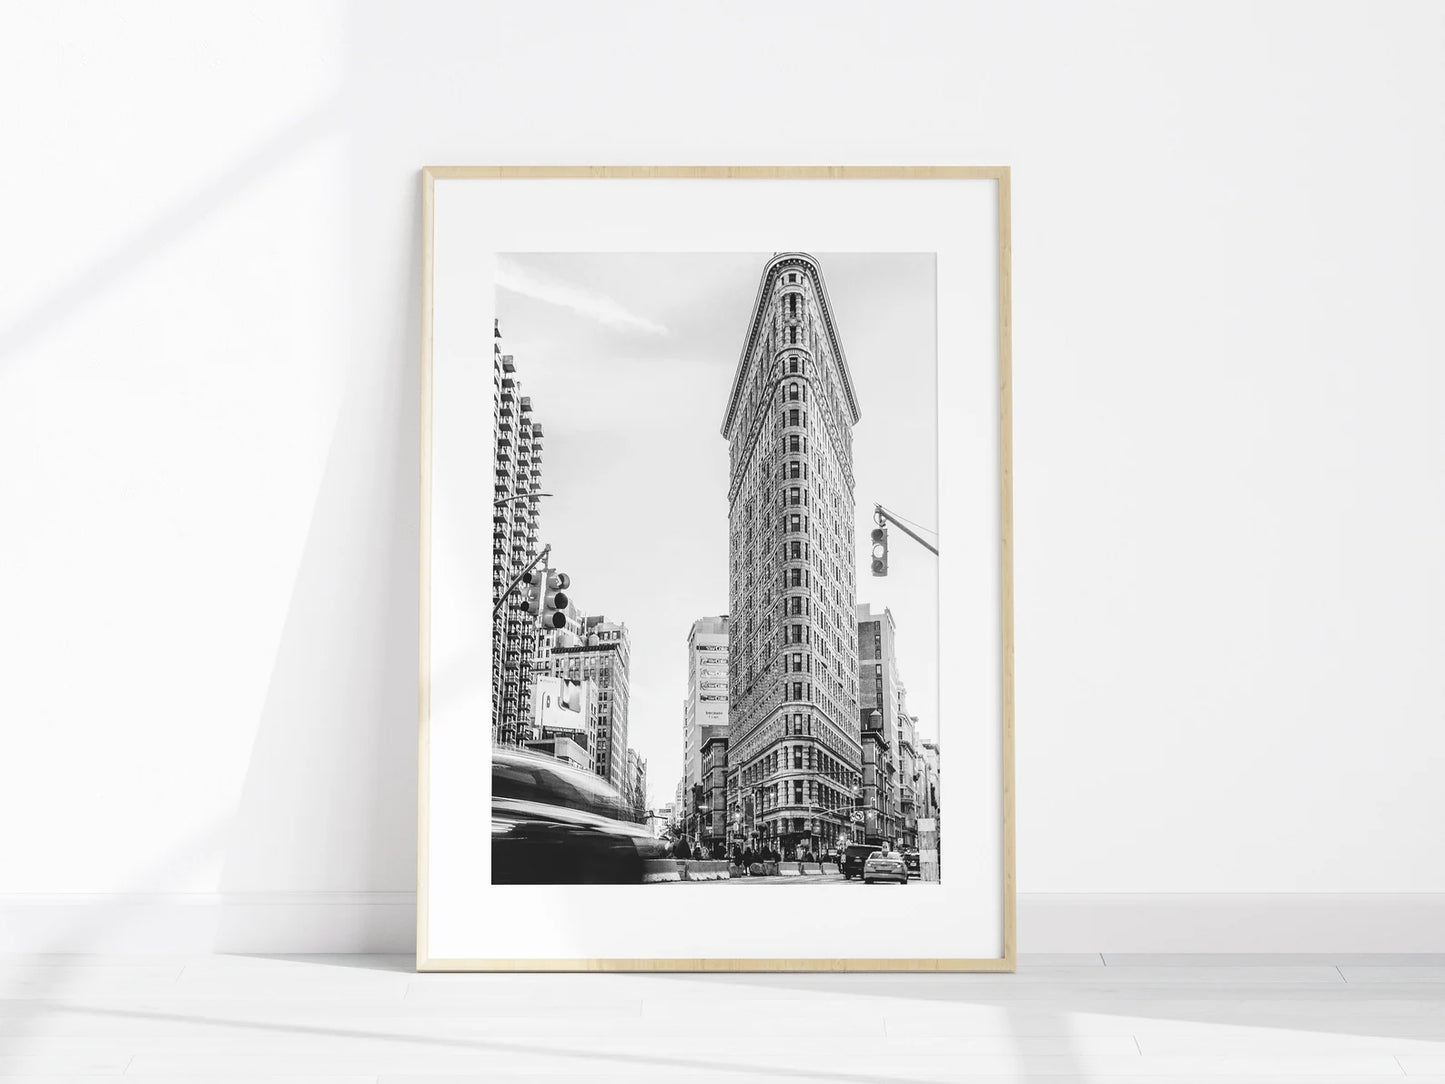 New York City Photography Set of 6 NYC Black and White Wall Art